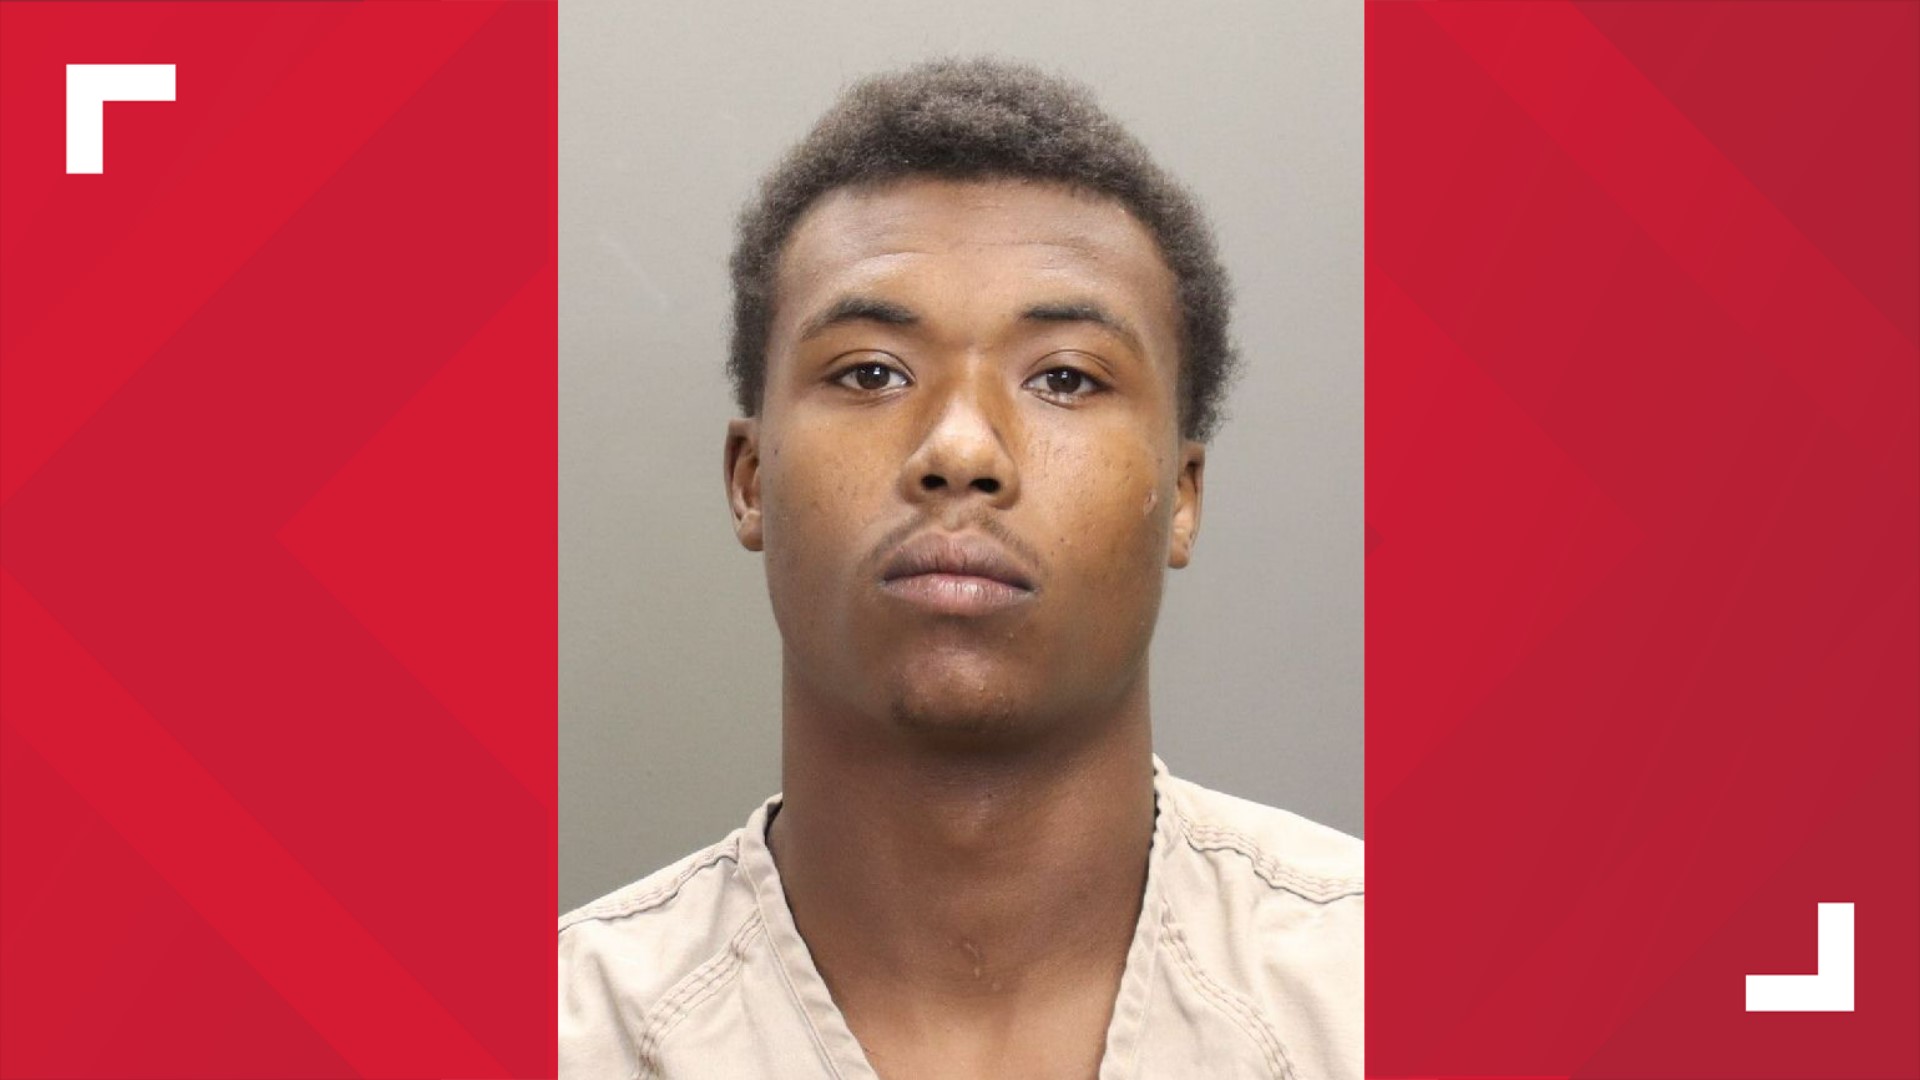 Kyrique Camper is charged with one count each of murder and criminal mischief. The charges stem from the Oct. 16 shooting that left 17-year-old Aniyah Elie dead.